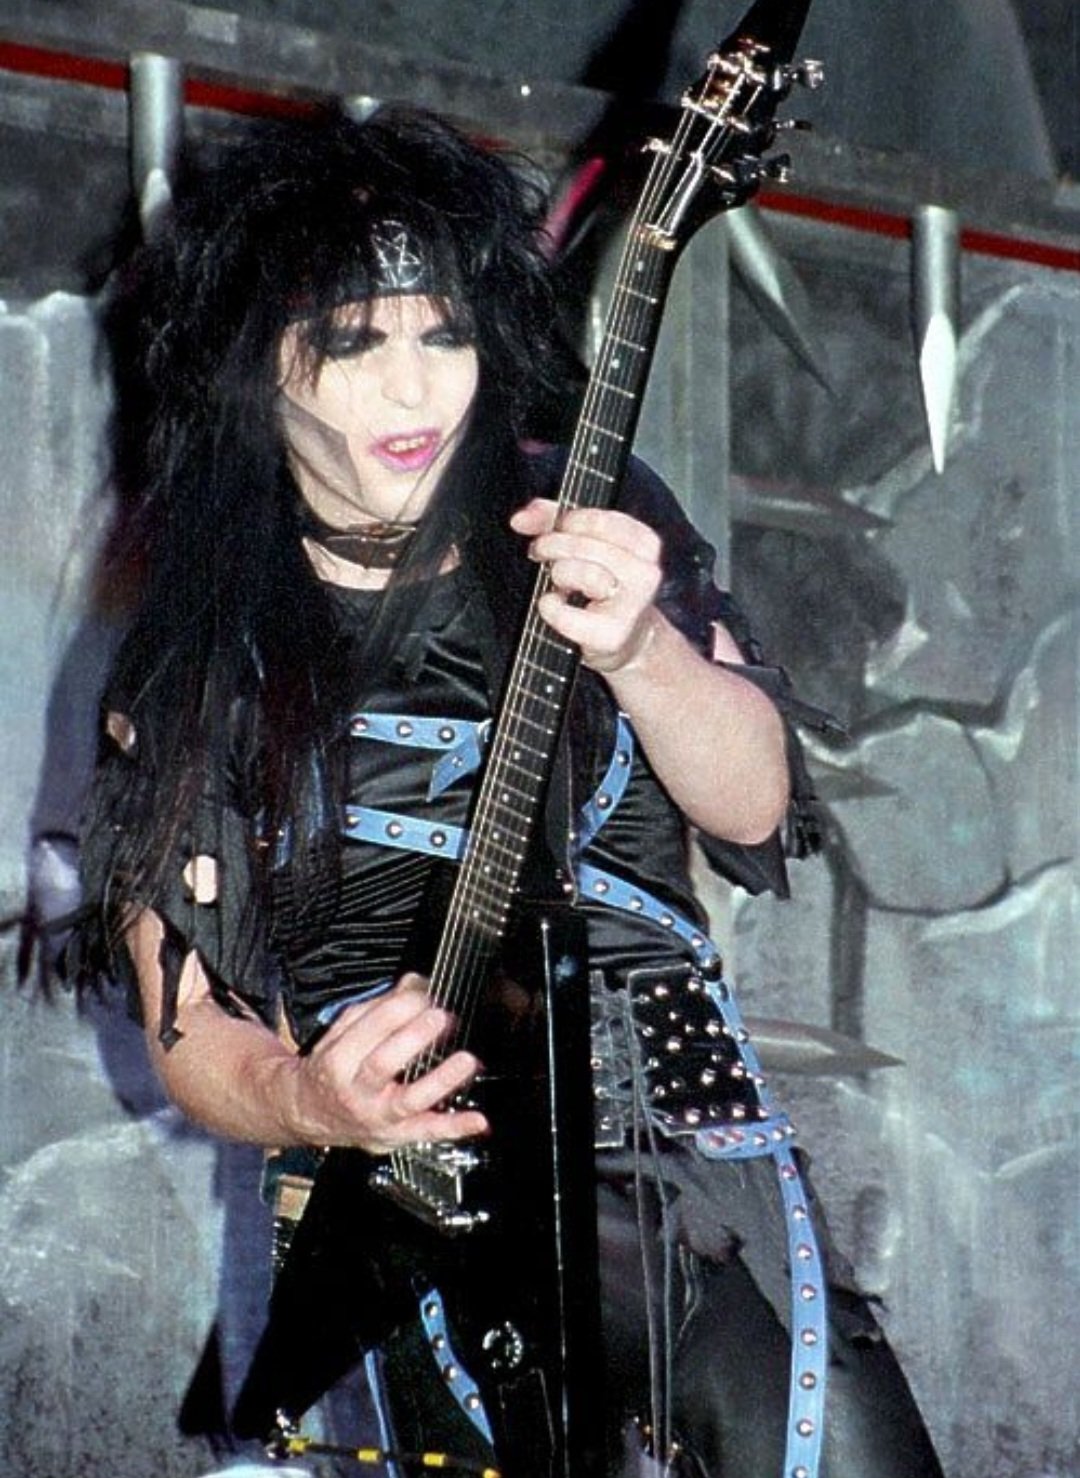 Happy Birthday, Mr. Mick Mars!! Thank You for always being a CLASS ACT!! We Love You out here!!  